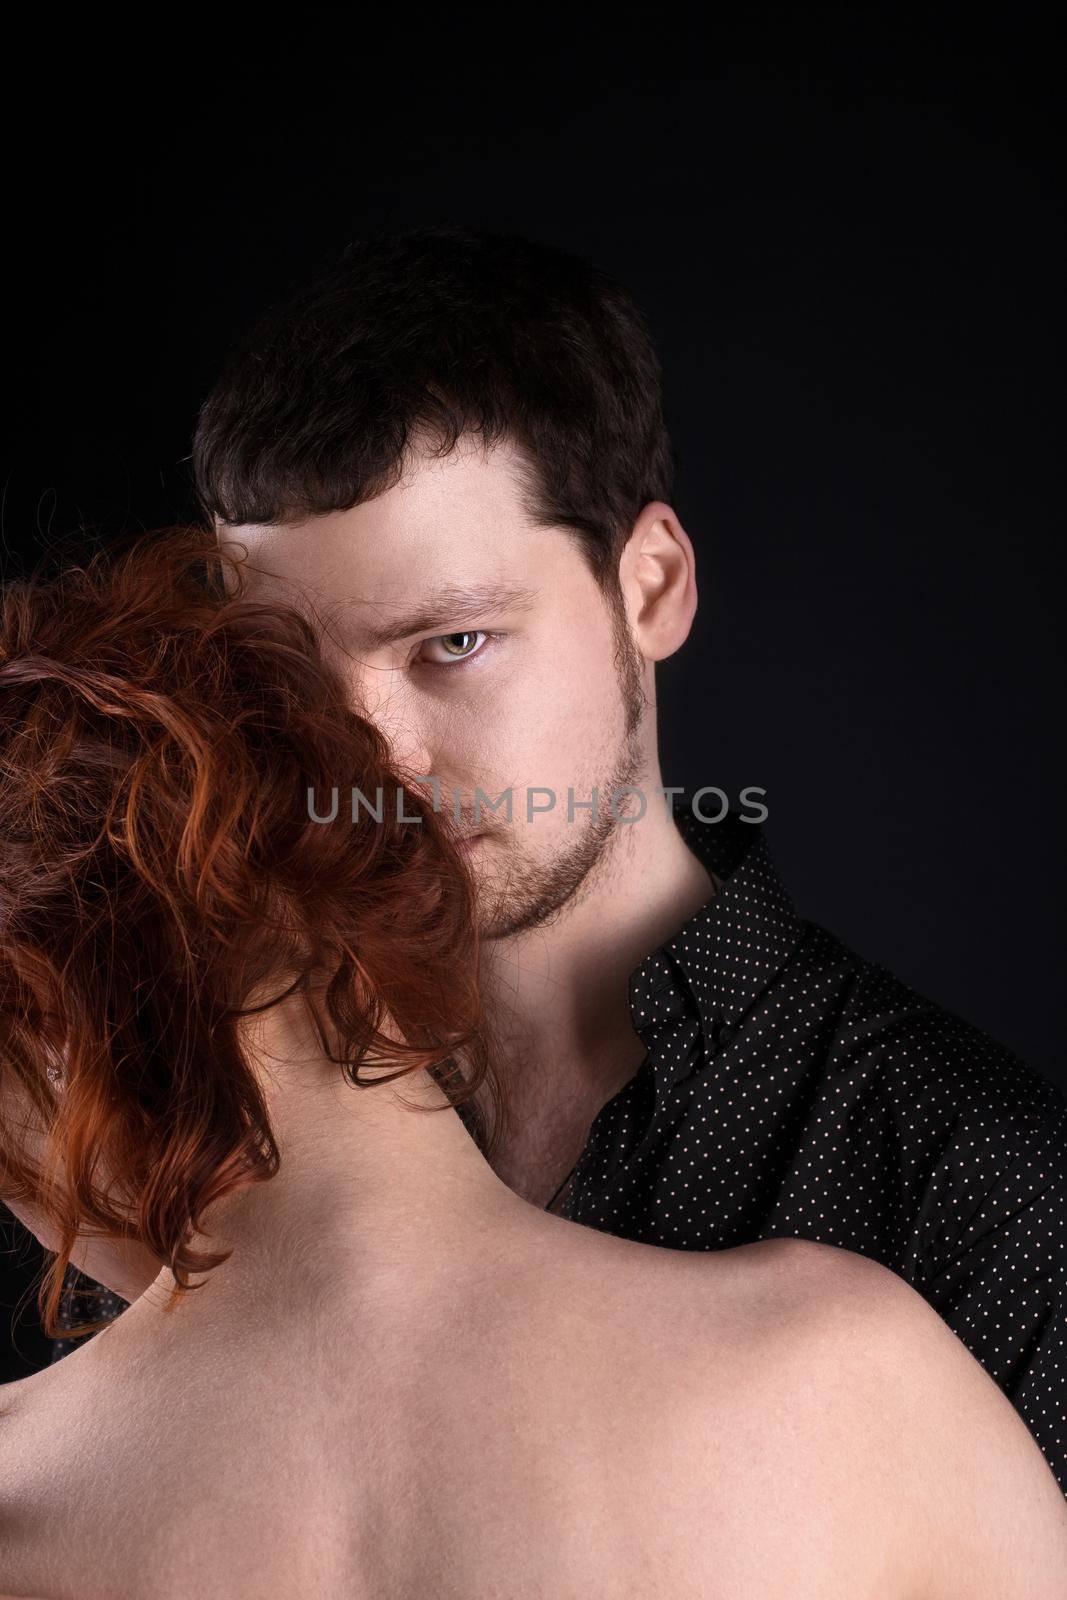 Man and red woman - lovers portrait by rivertime